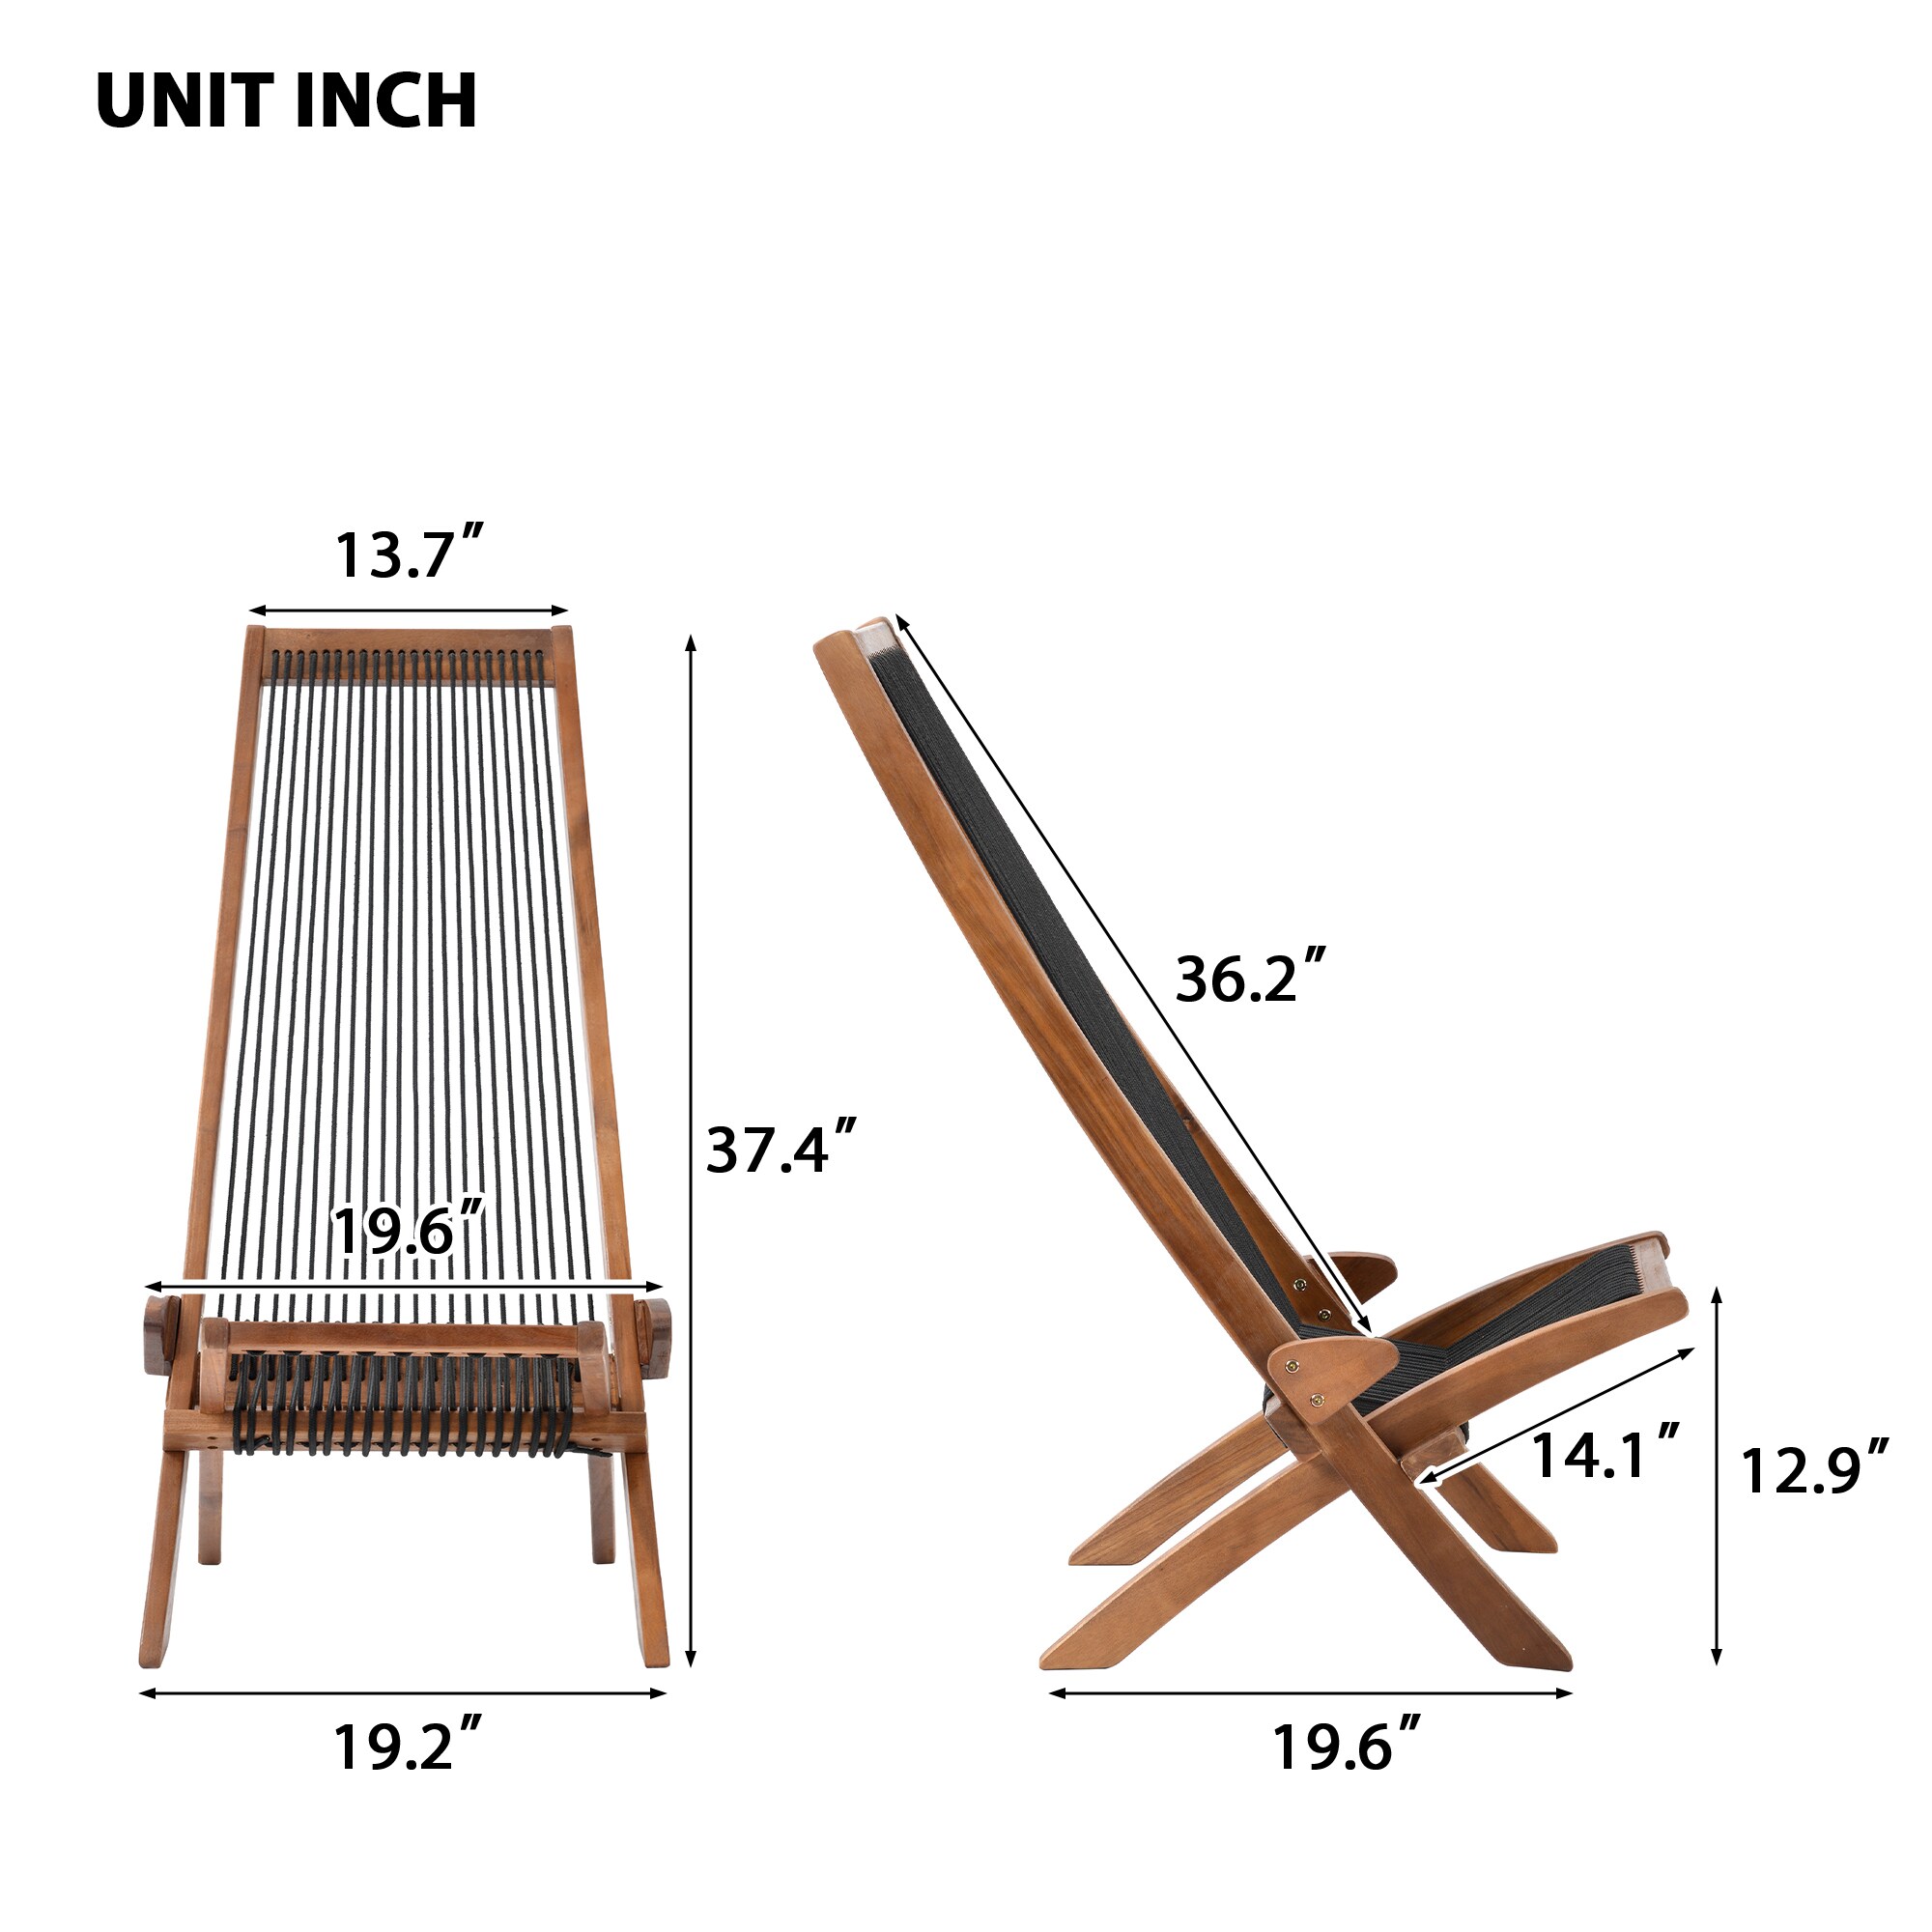 Tamarack Folding Wooden Outdoor Low-Profile Lounge Chair